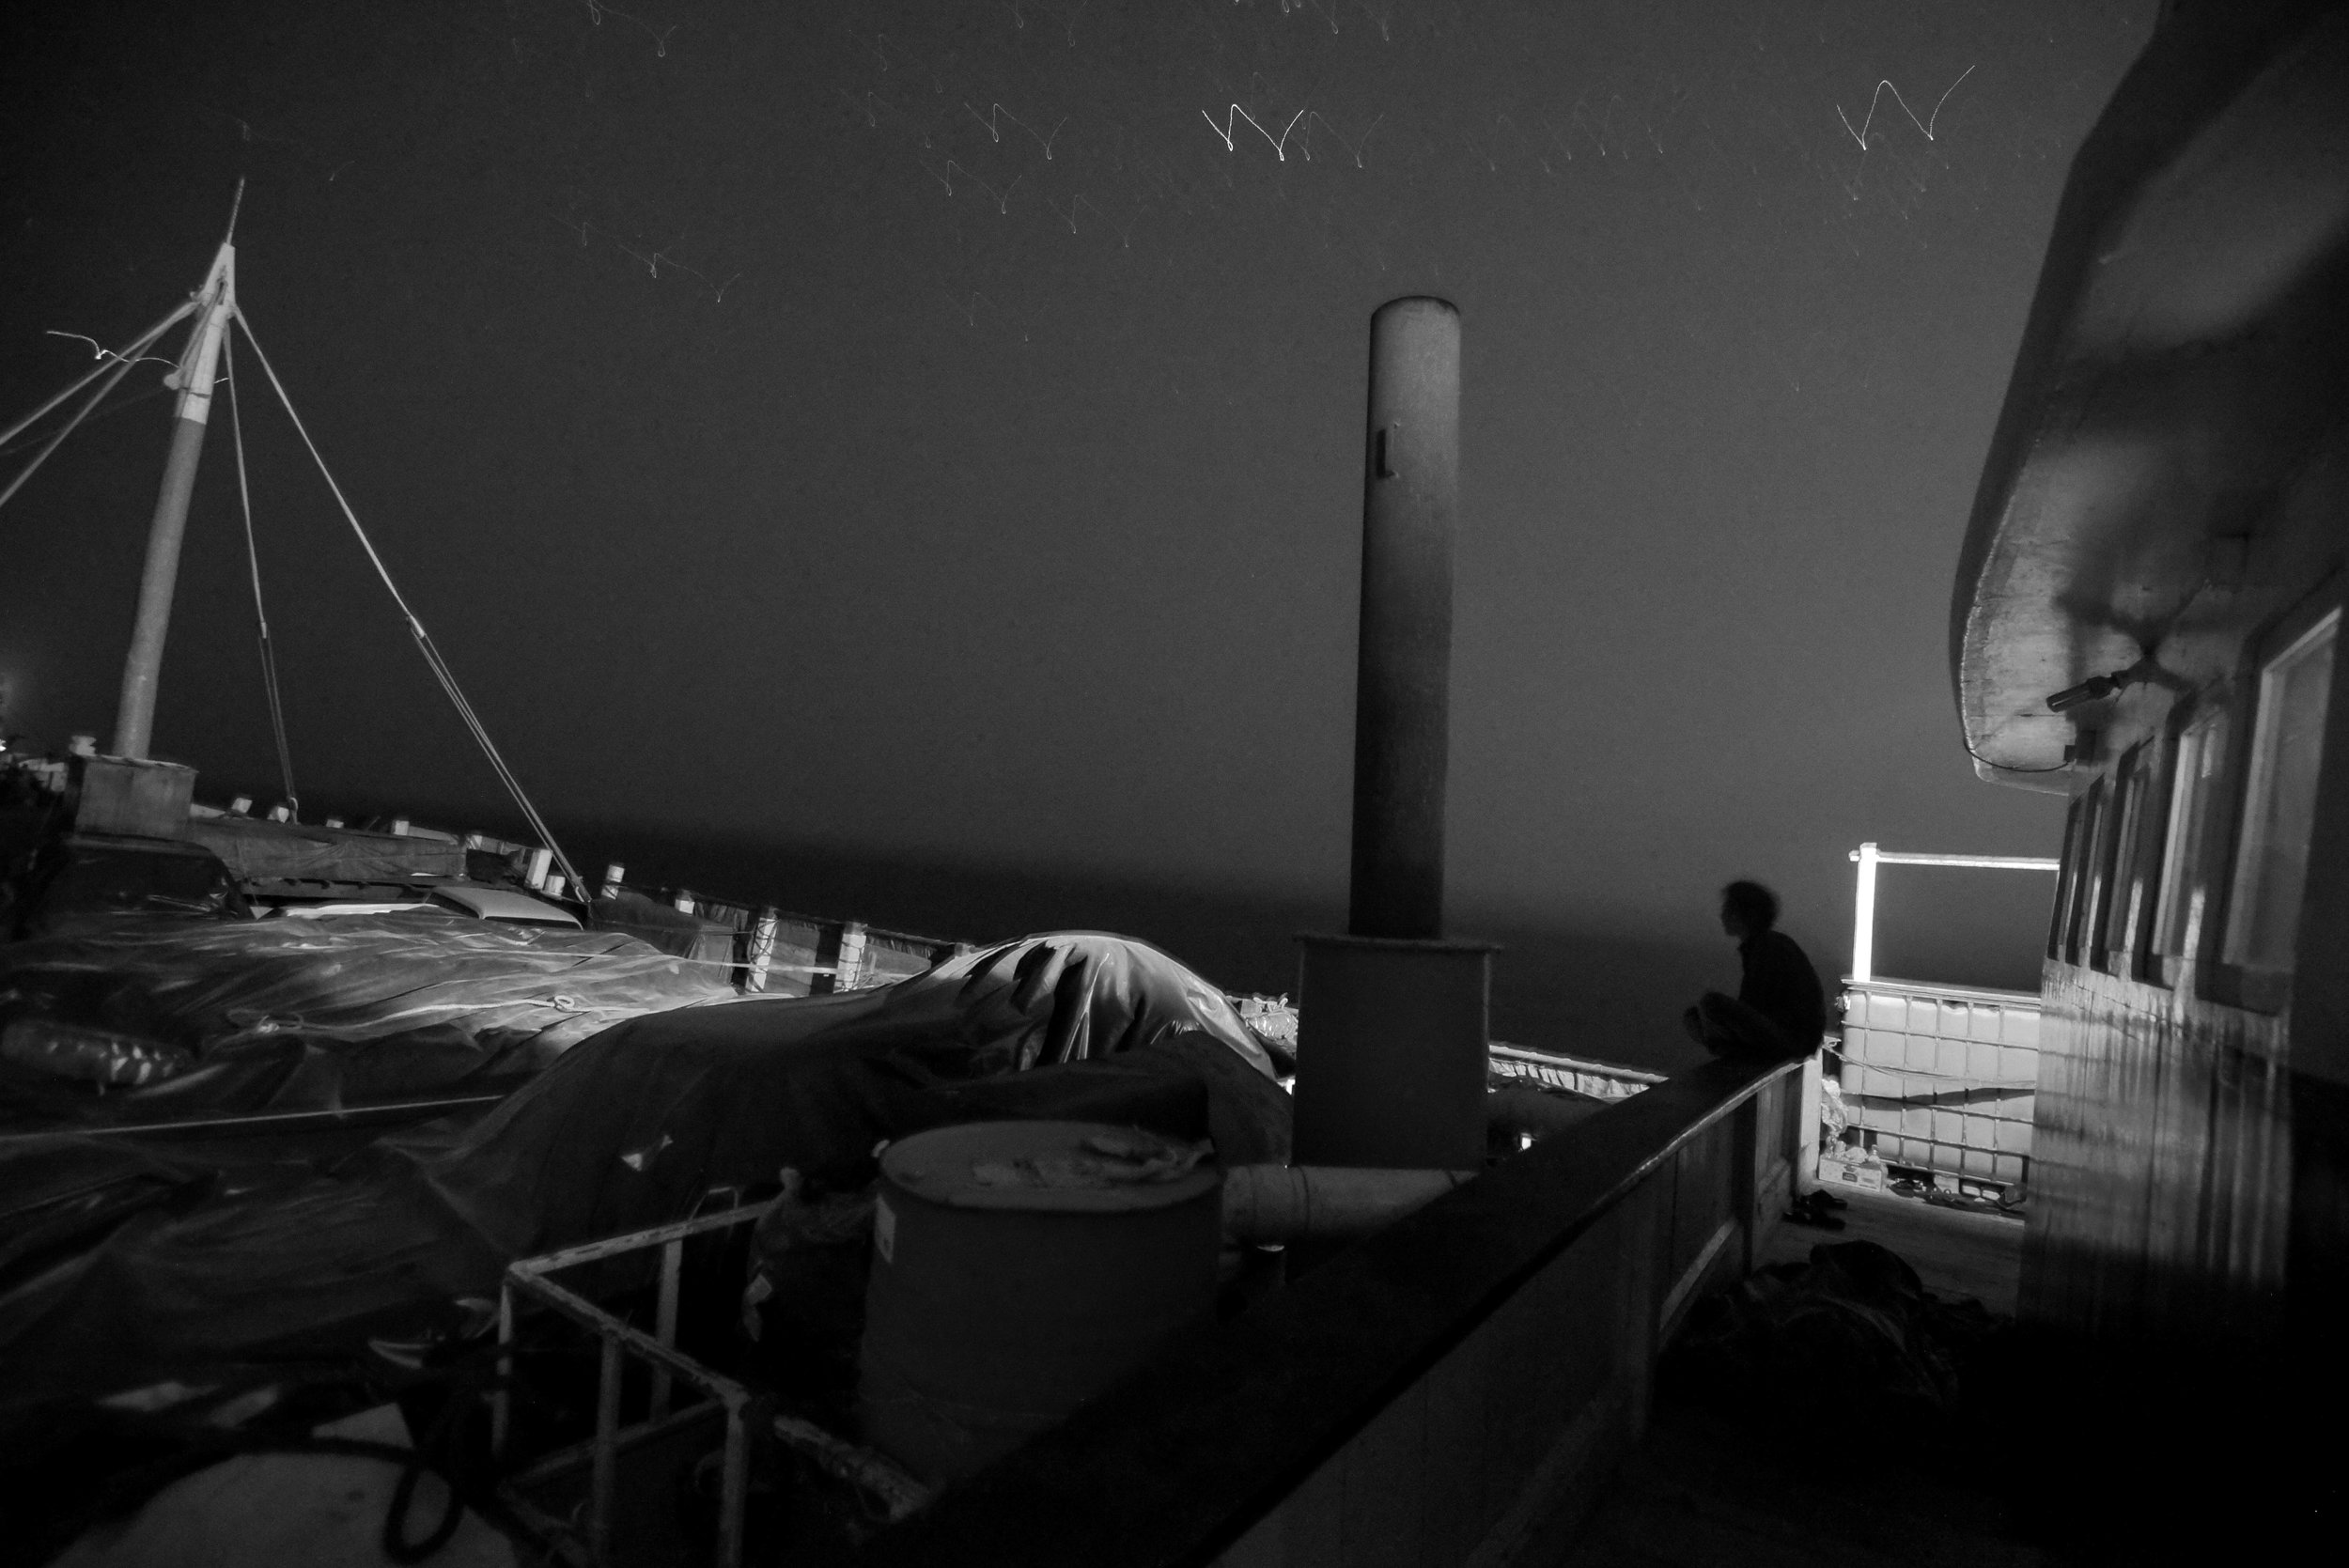  Project Socotra: The invisible Island February 2019
Cargo Ship from Oman to Socotra Island. Indian sailor on a night watch. Twelve Indians work on the small wooden ship, caring cement. They work for around 150$ a month. They don't have cabins, but 